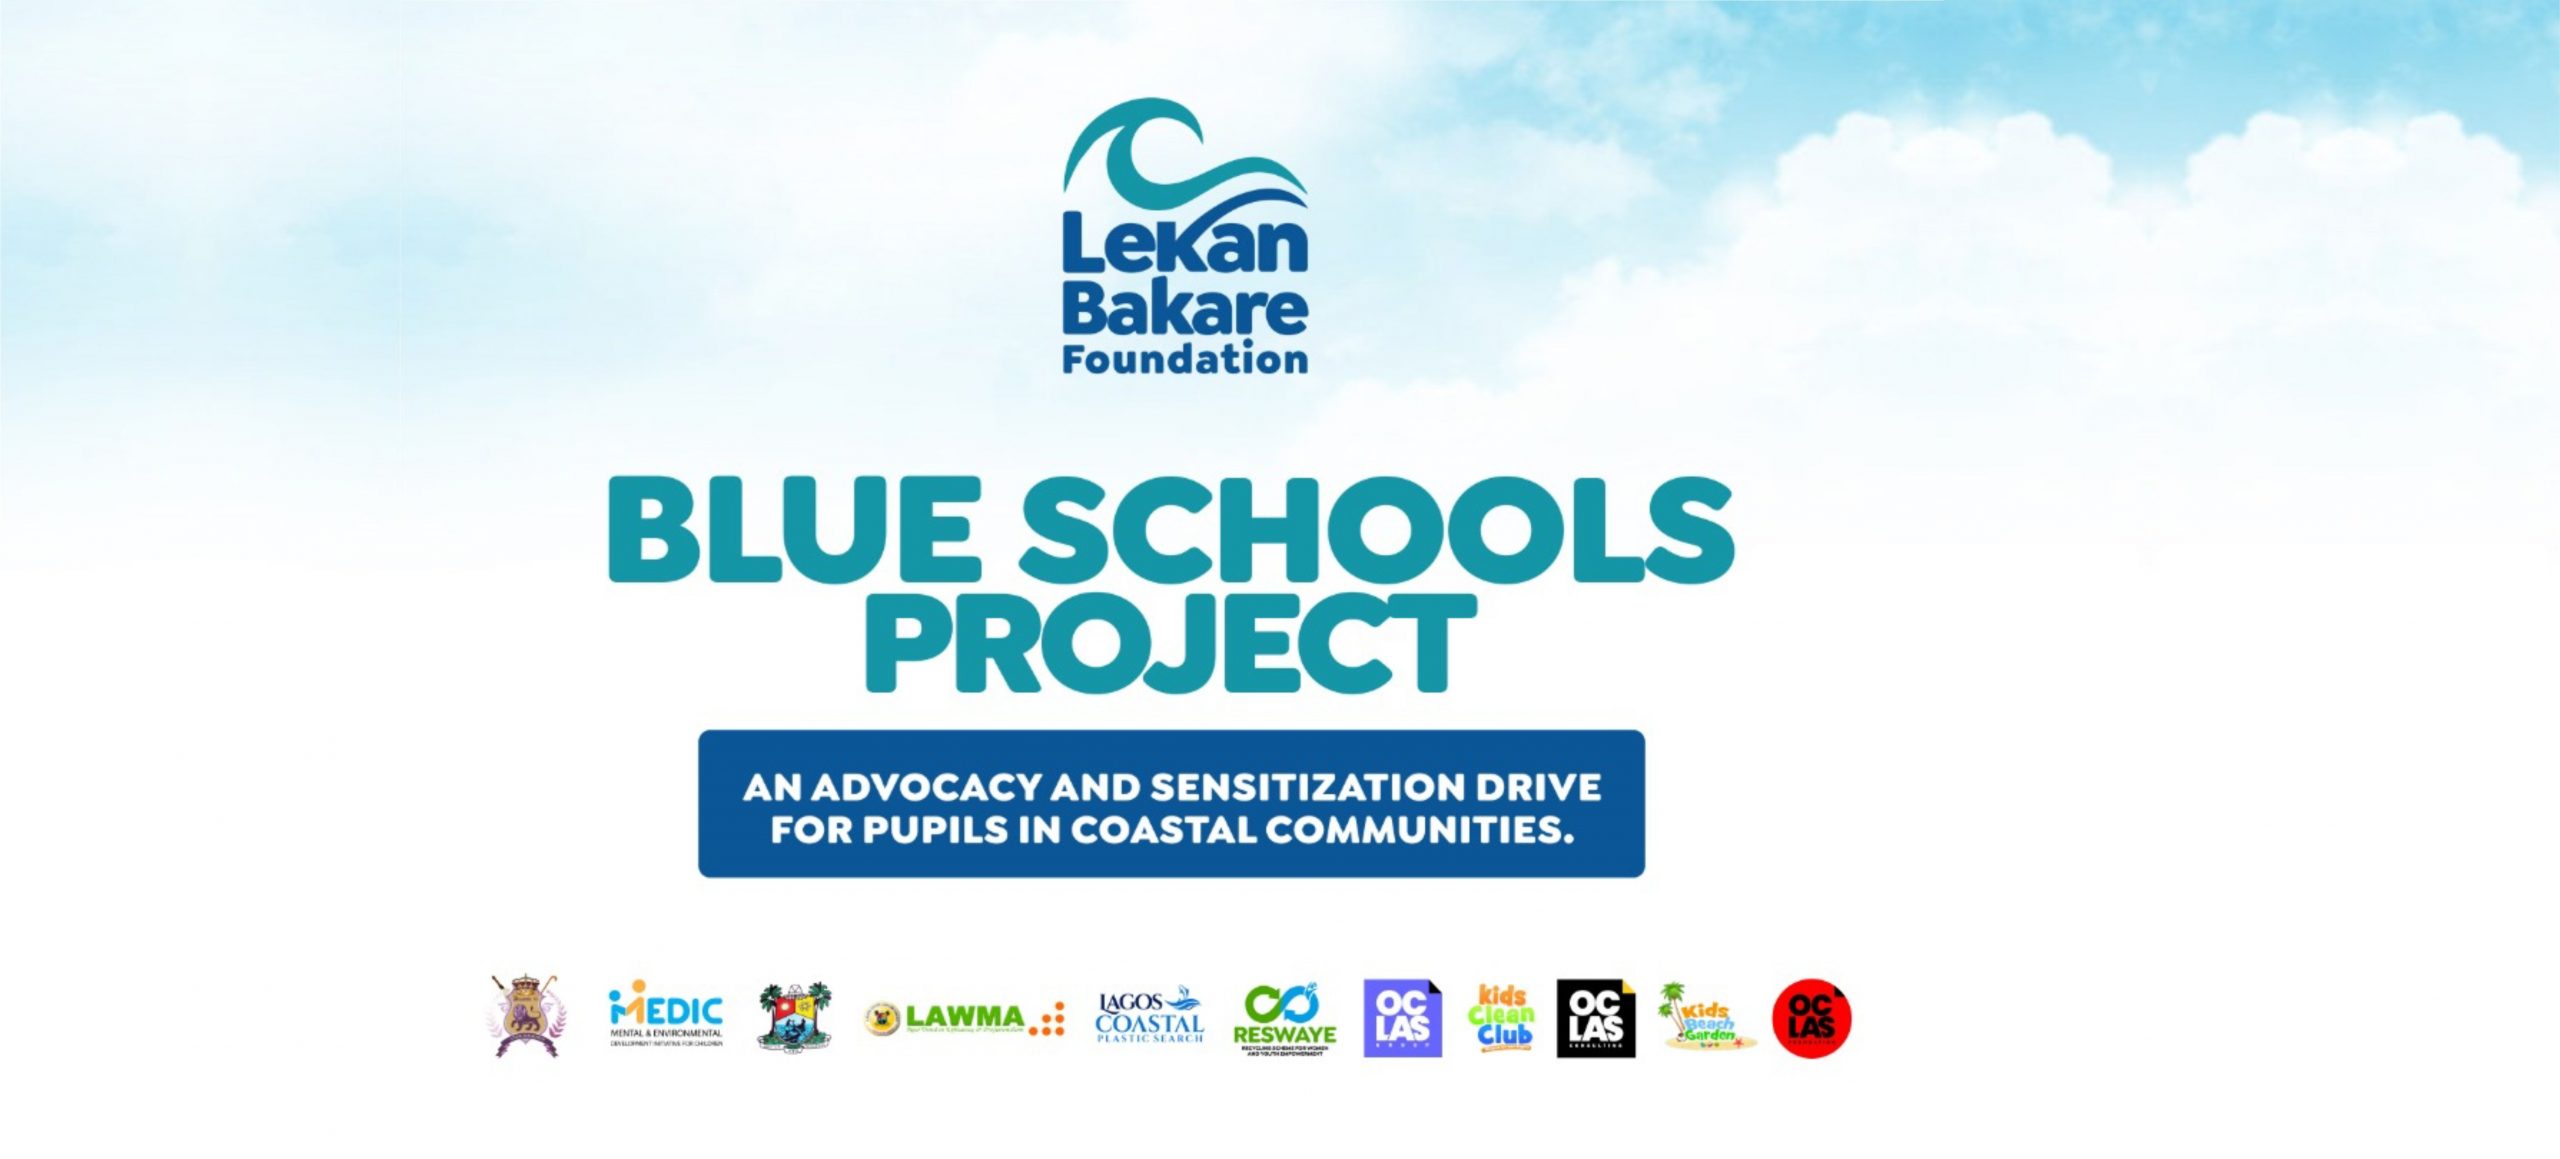 The LBF Blue Schools Project